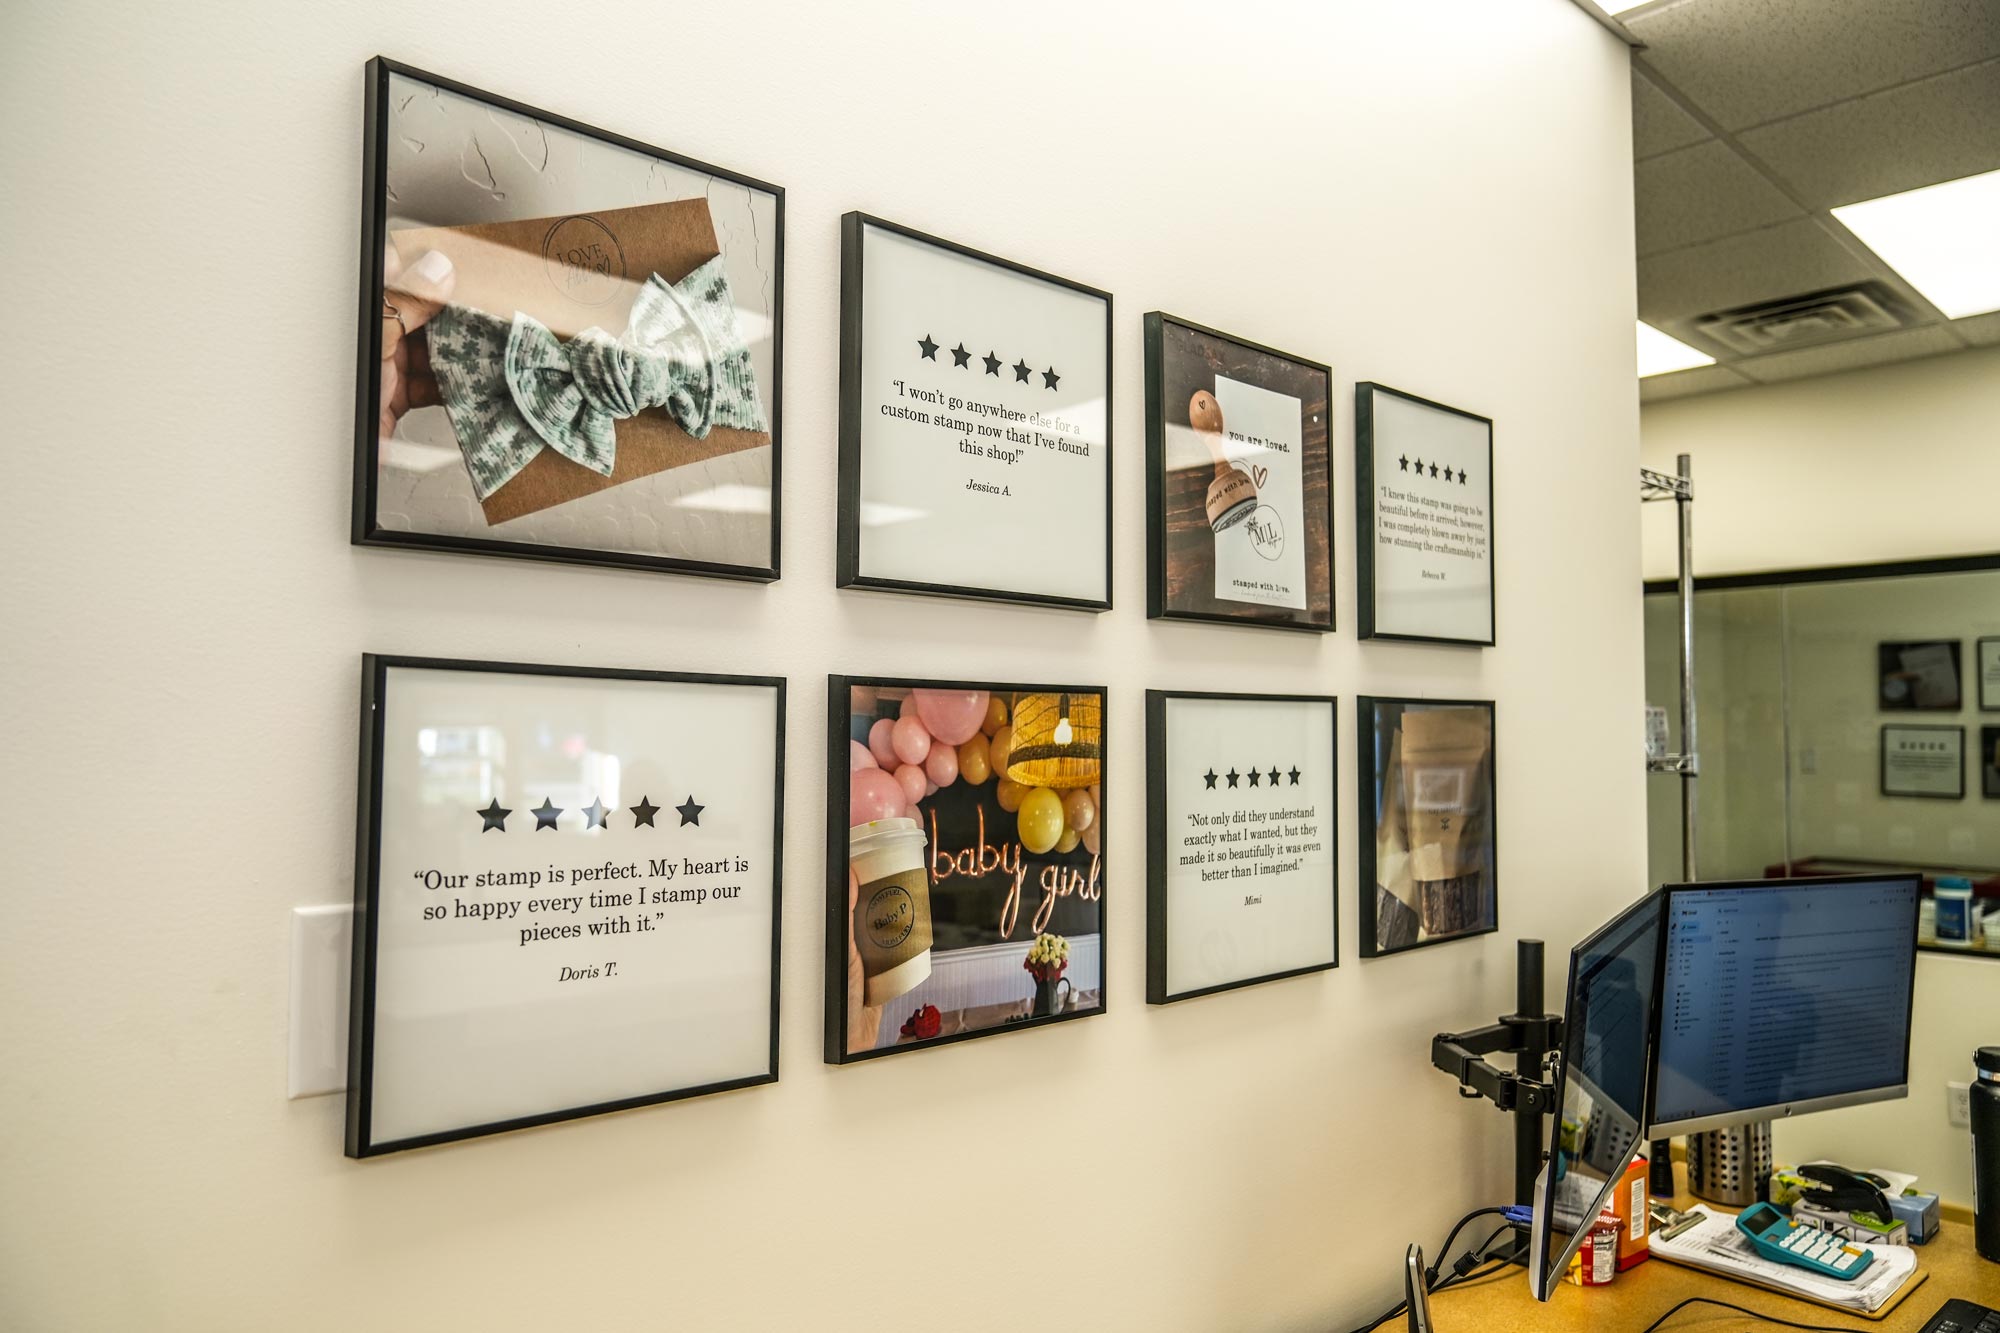 A wall display featuring framed customer testimonials and images of custom rubber stamp projects reflecting customer satisfaction and the personalized touch of the brand alongside a workstation with a computer monitor